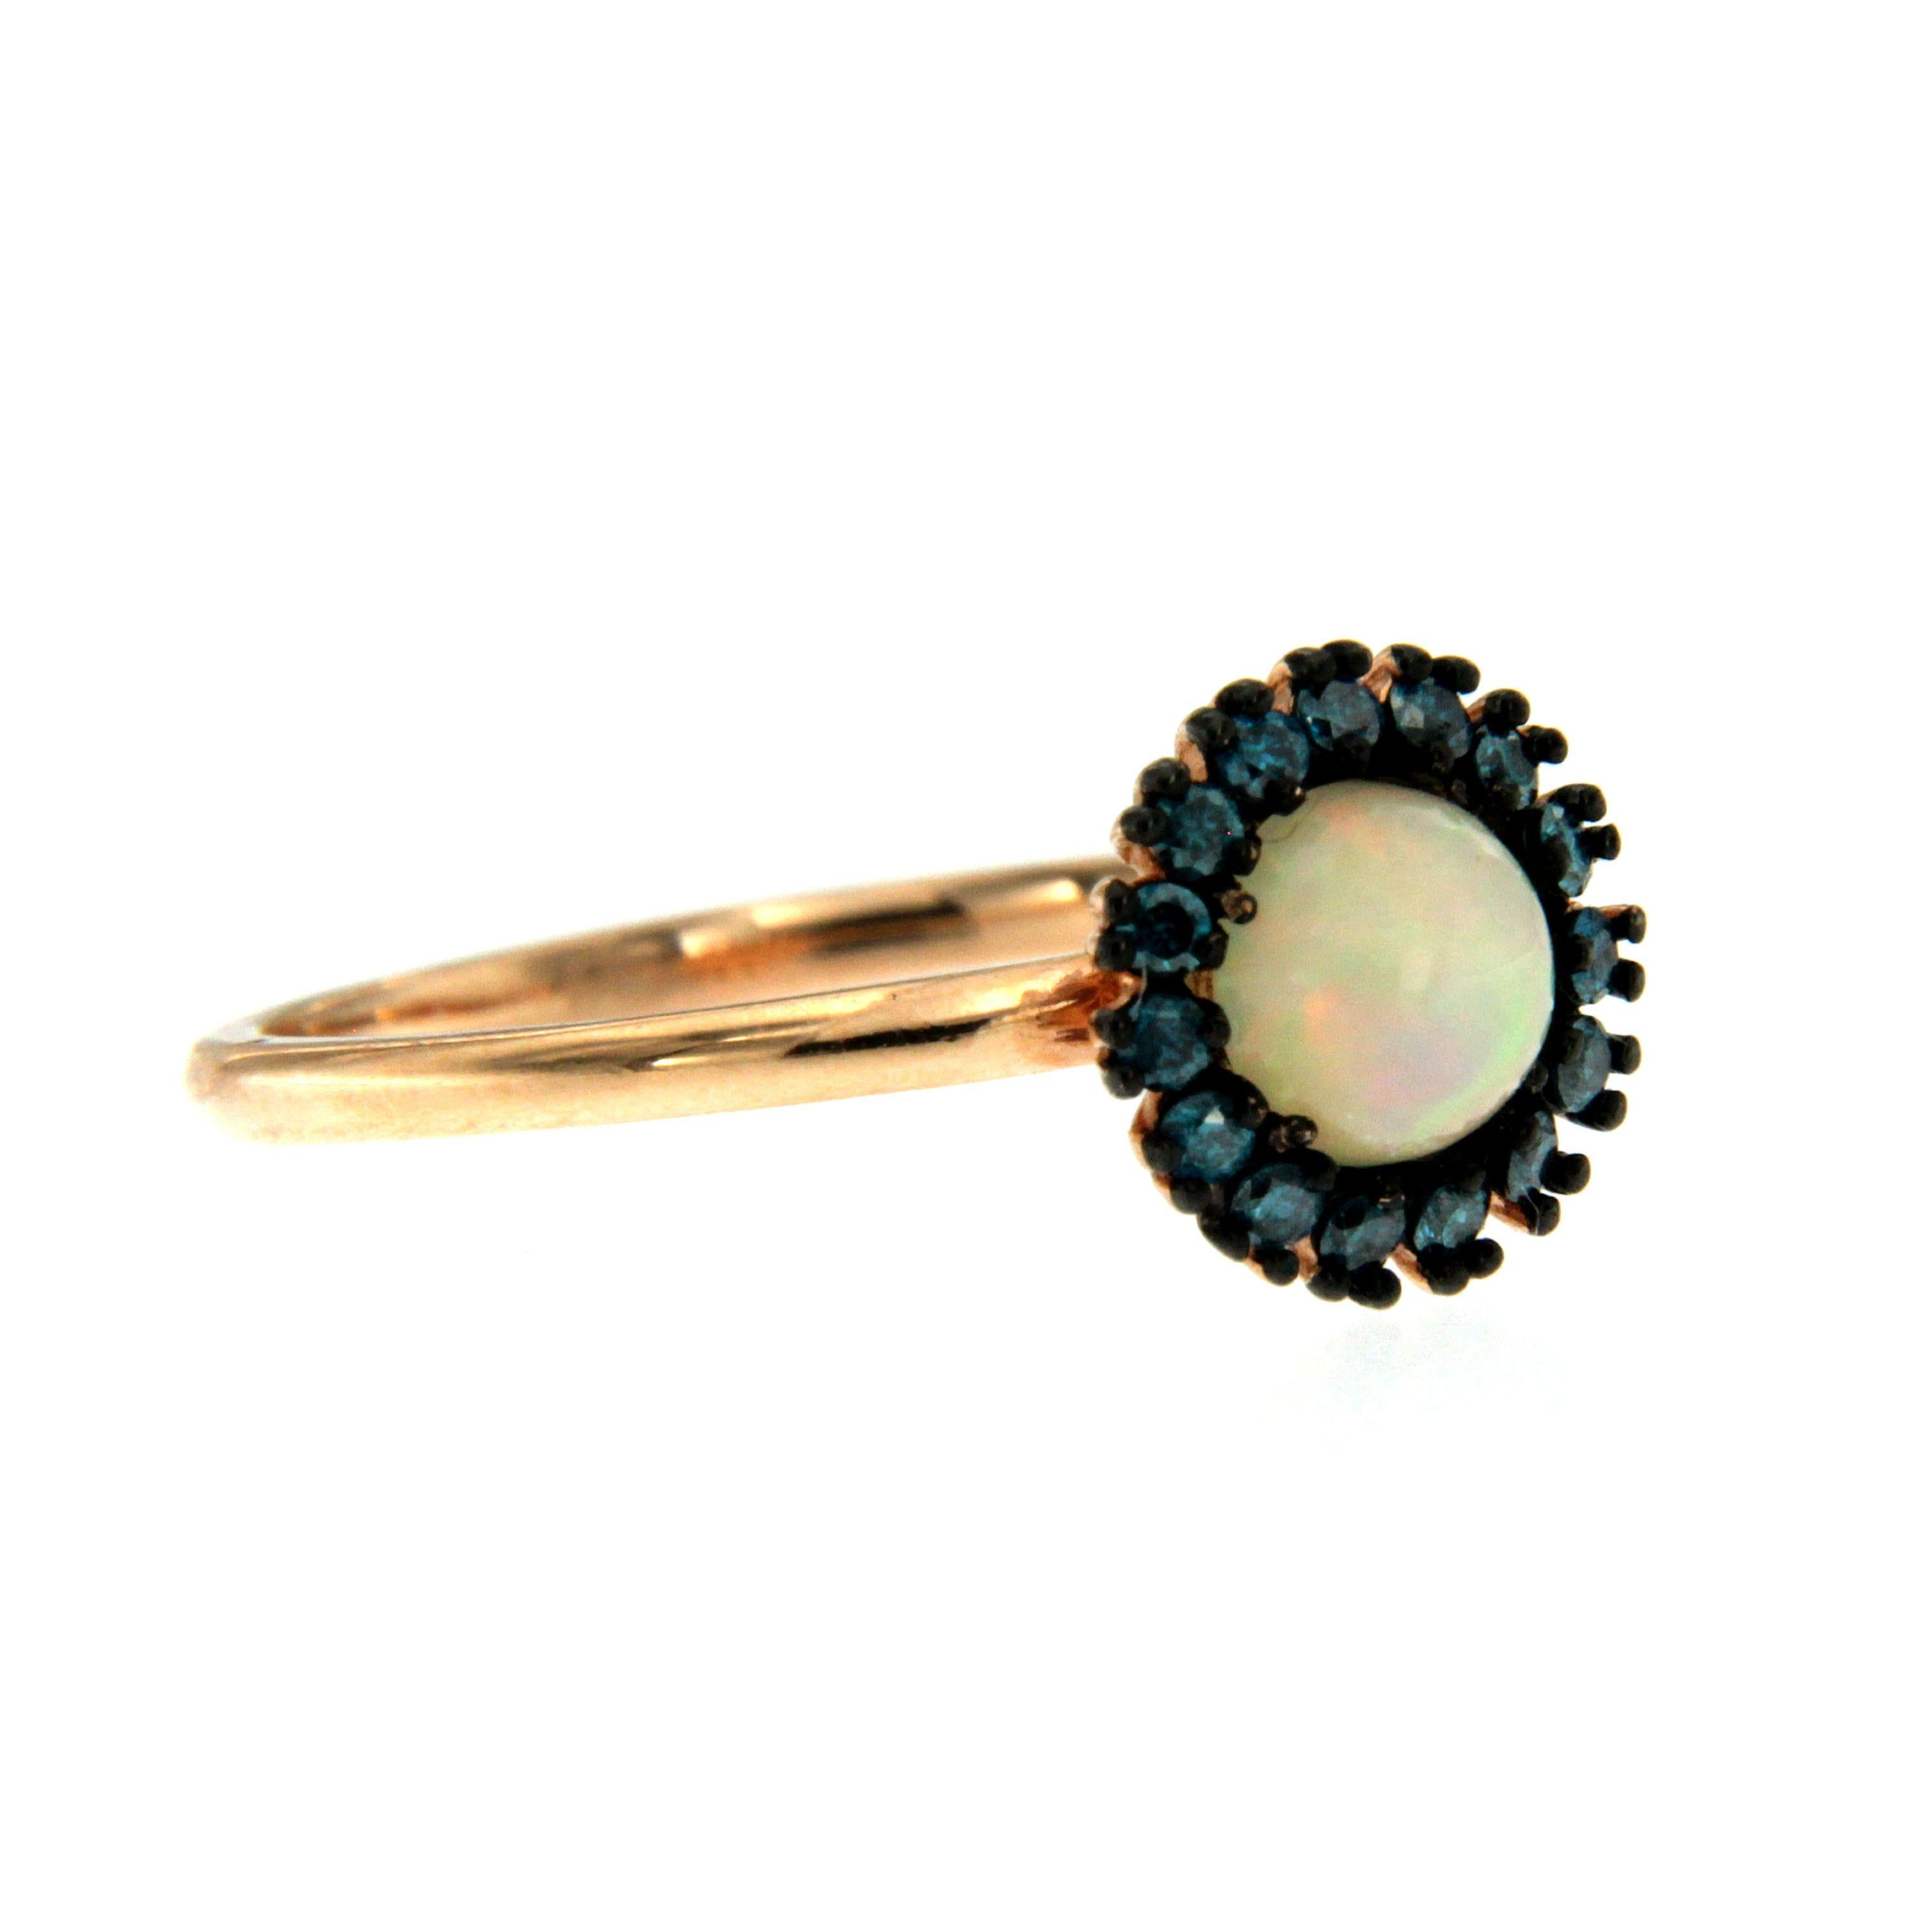 This ring is handmade from 14k gold with a single opal stone surrounded by turquoise colored diamonds. 

CONDITION: brand new 
METAL: 14k rose gold
GEM STONE: Diamond 0.08 total carats 
RING SIZE: US 6 - IT 12 - FR 52 - UK M, Resizable on request,